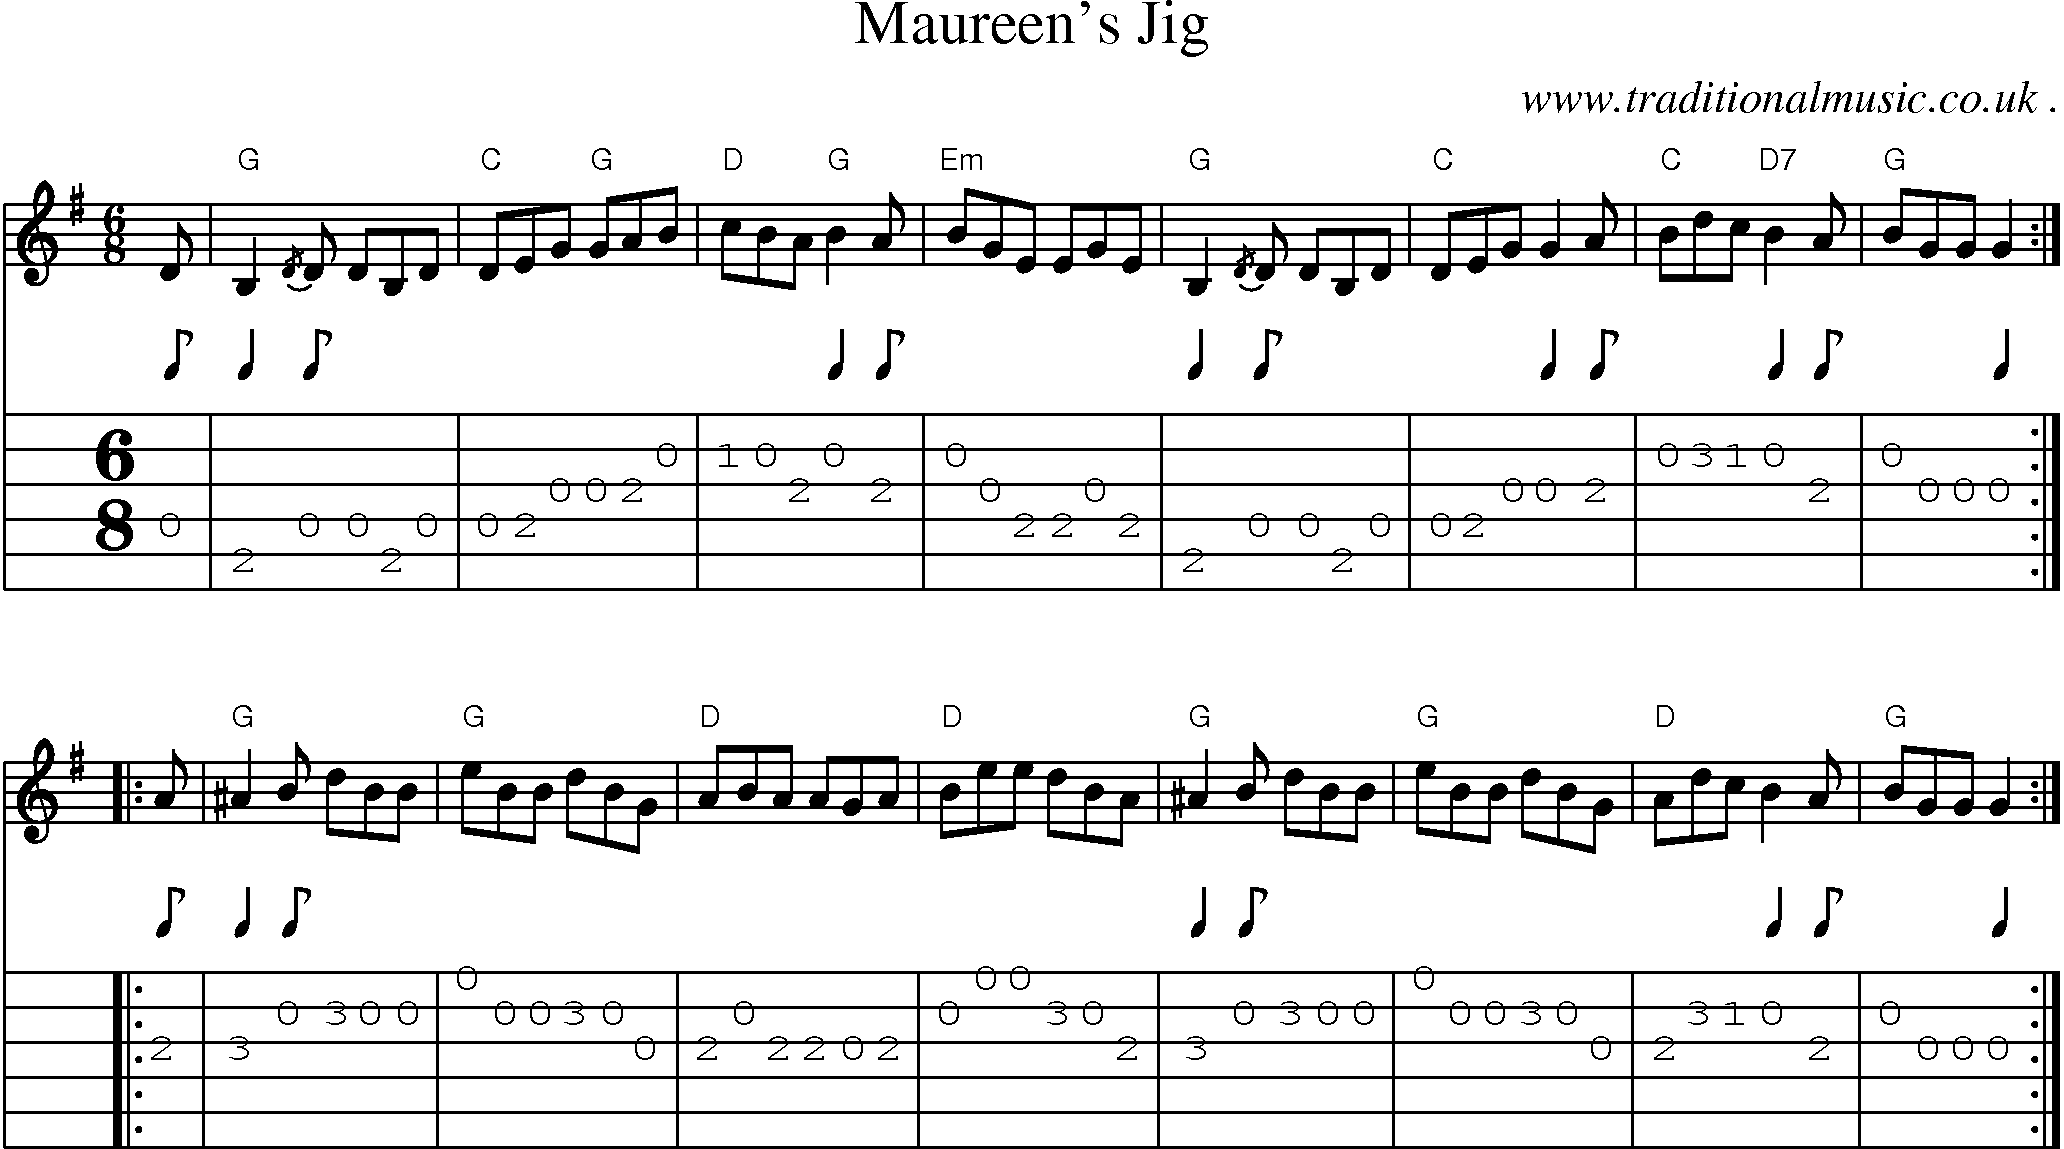 Sheet-music  score, Chords and Guitar Tabs for Maureens Jig